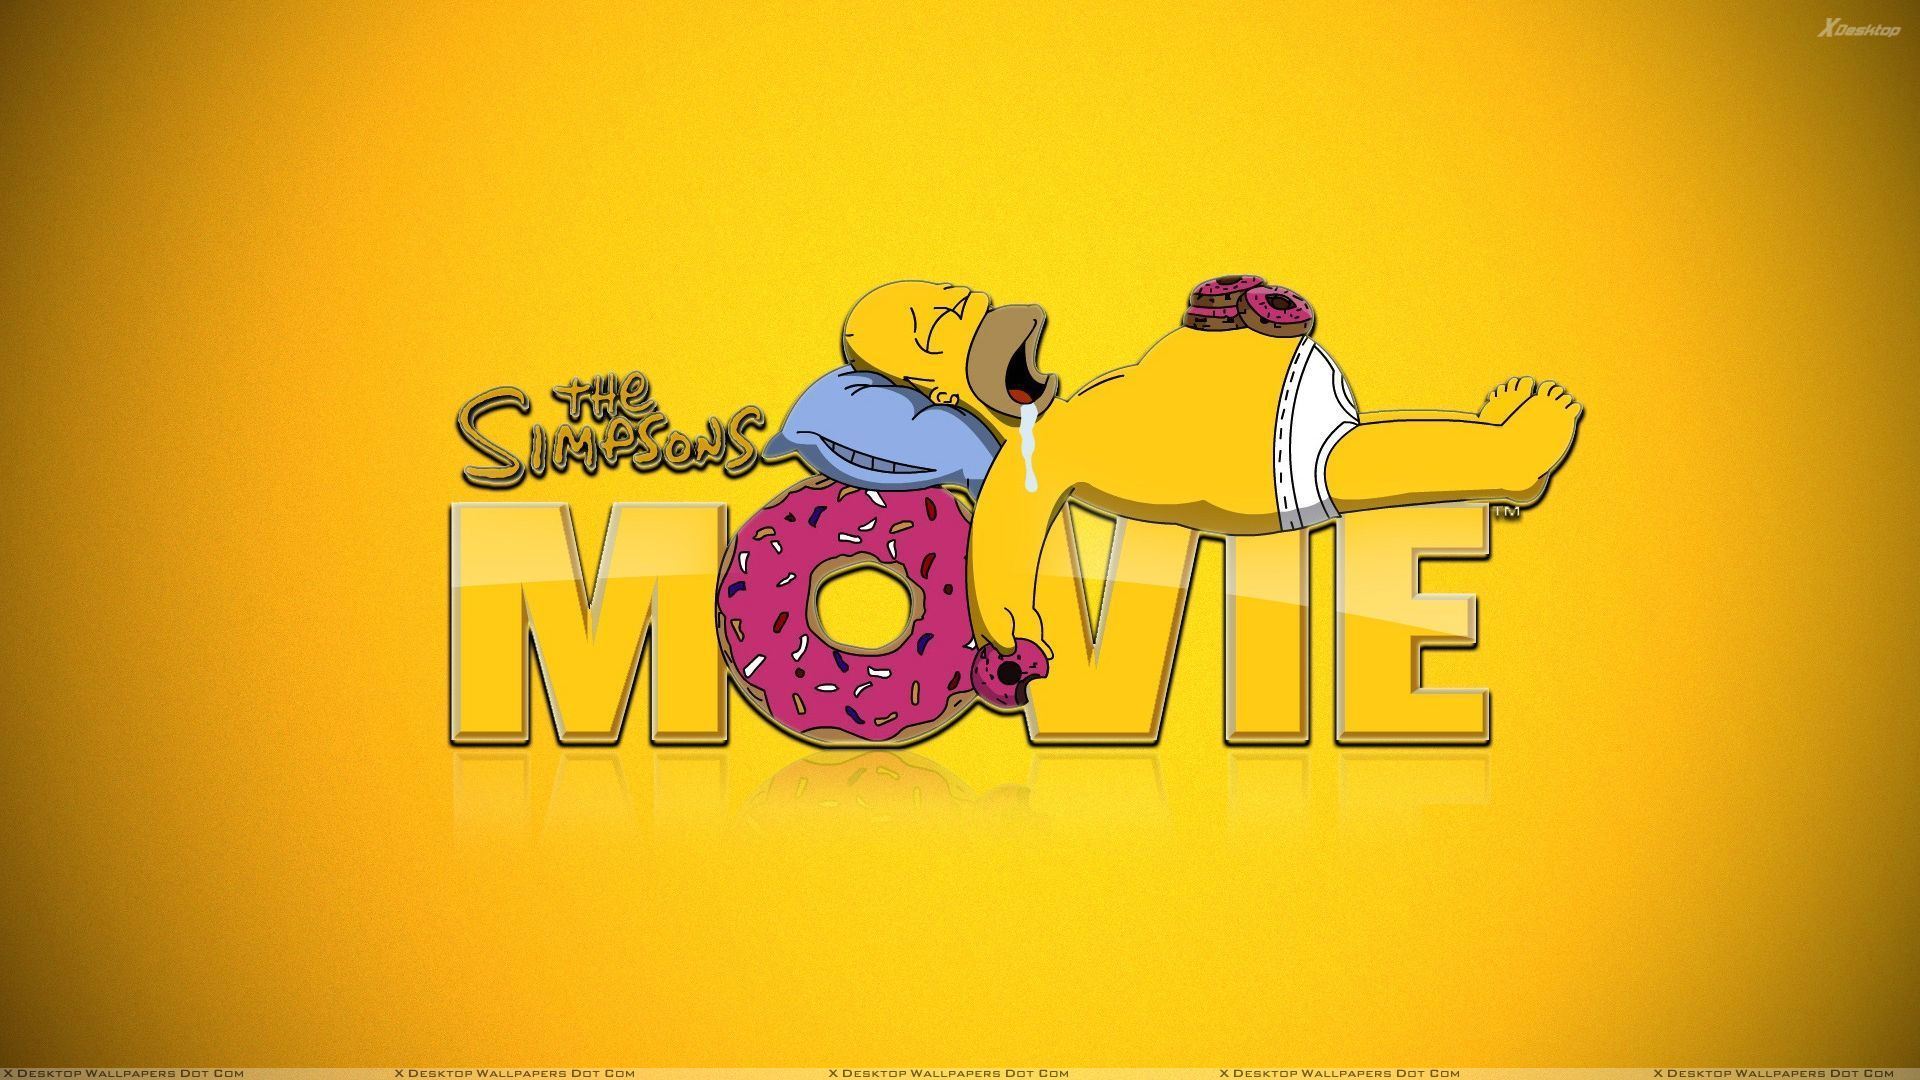 The Simpsons Movie Wallpaper Photos Image In HD